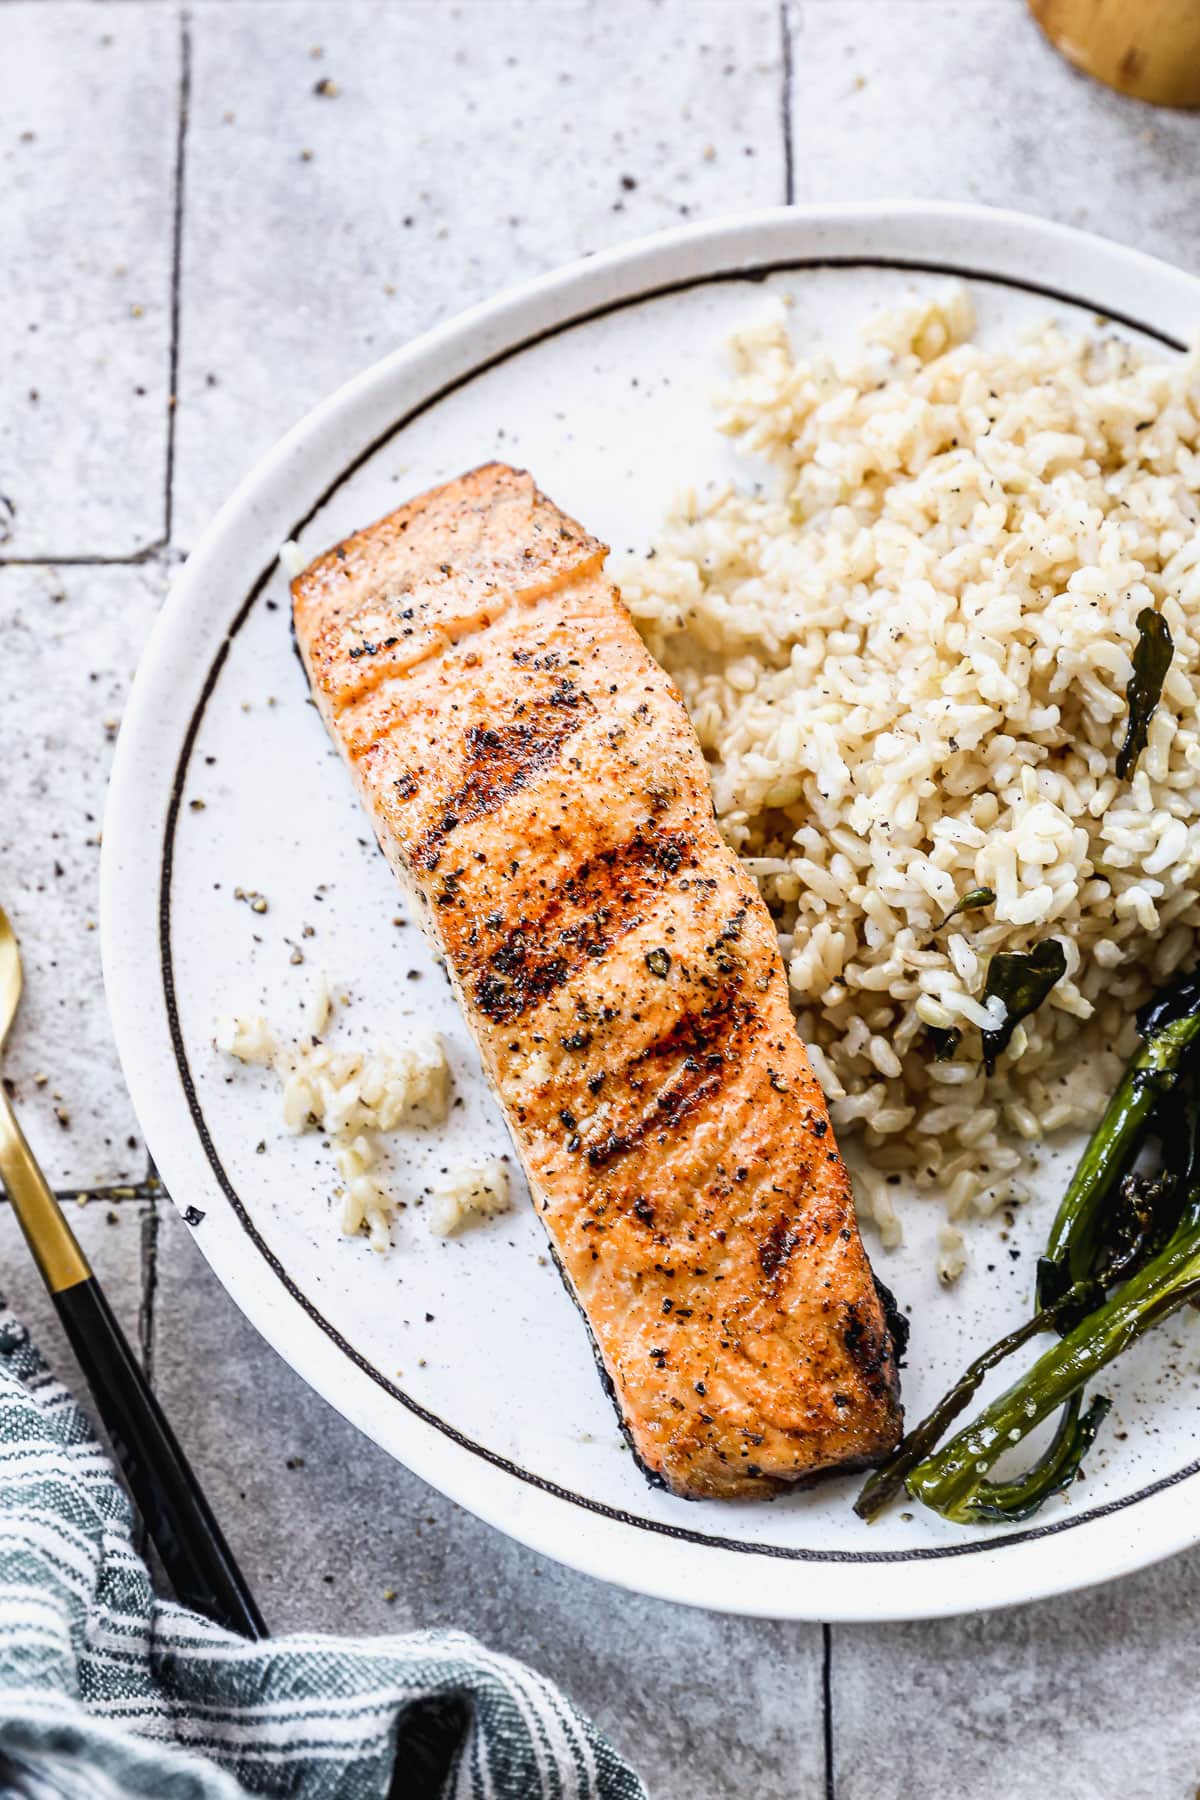 grilled salmon recipe on a plate with rice